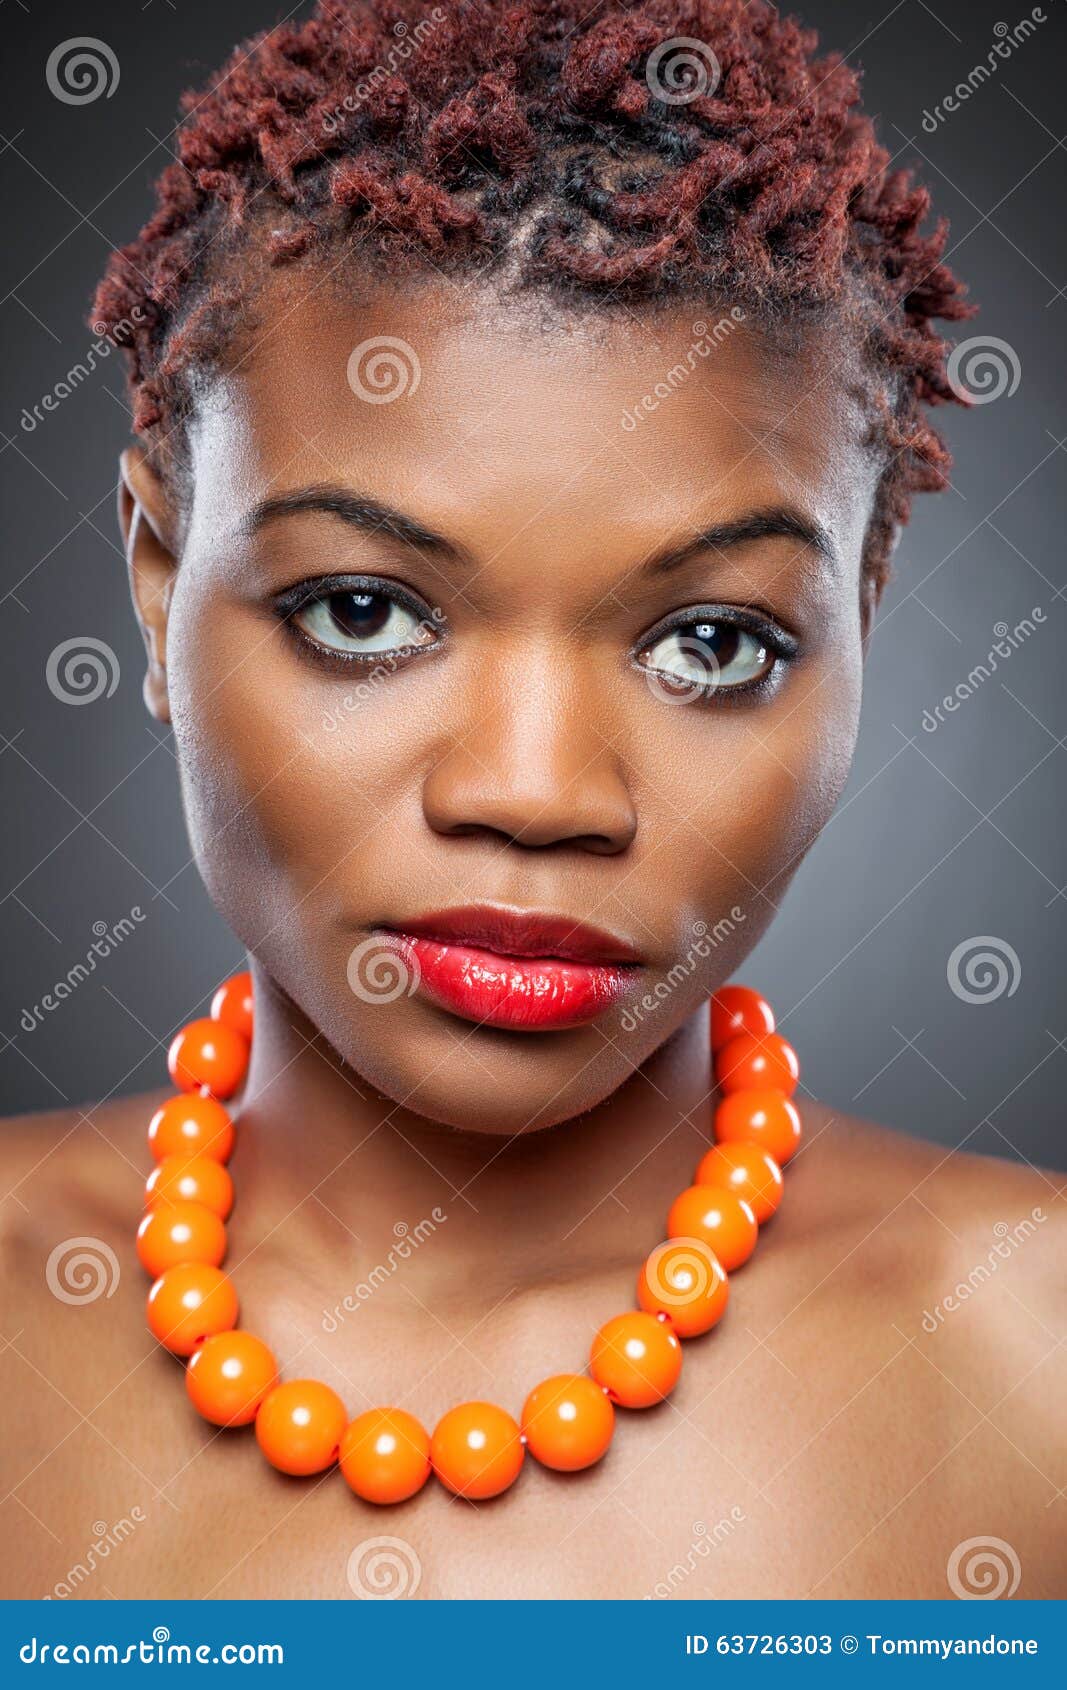 Black Beauty with Short Spiky Hair Stock Image - Image of clean,  background: 63726303